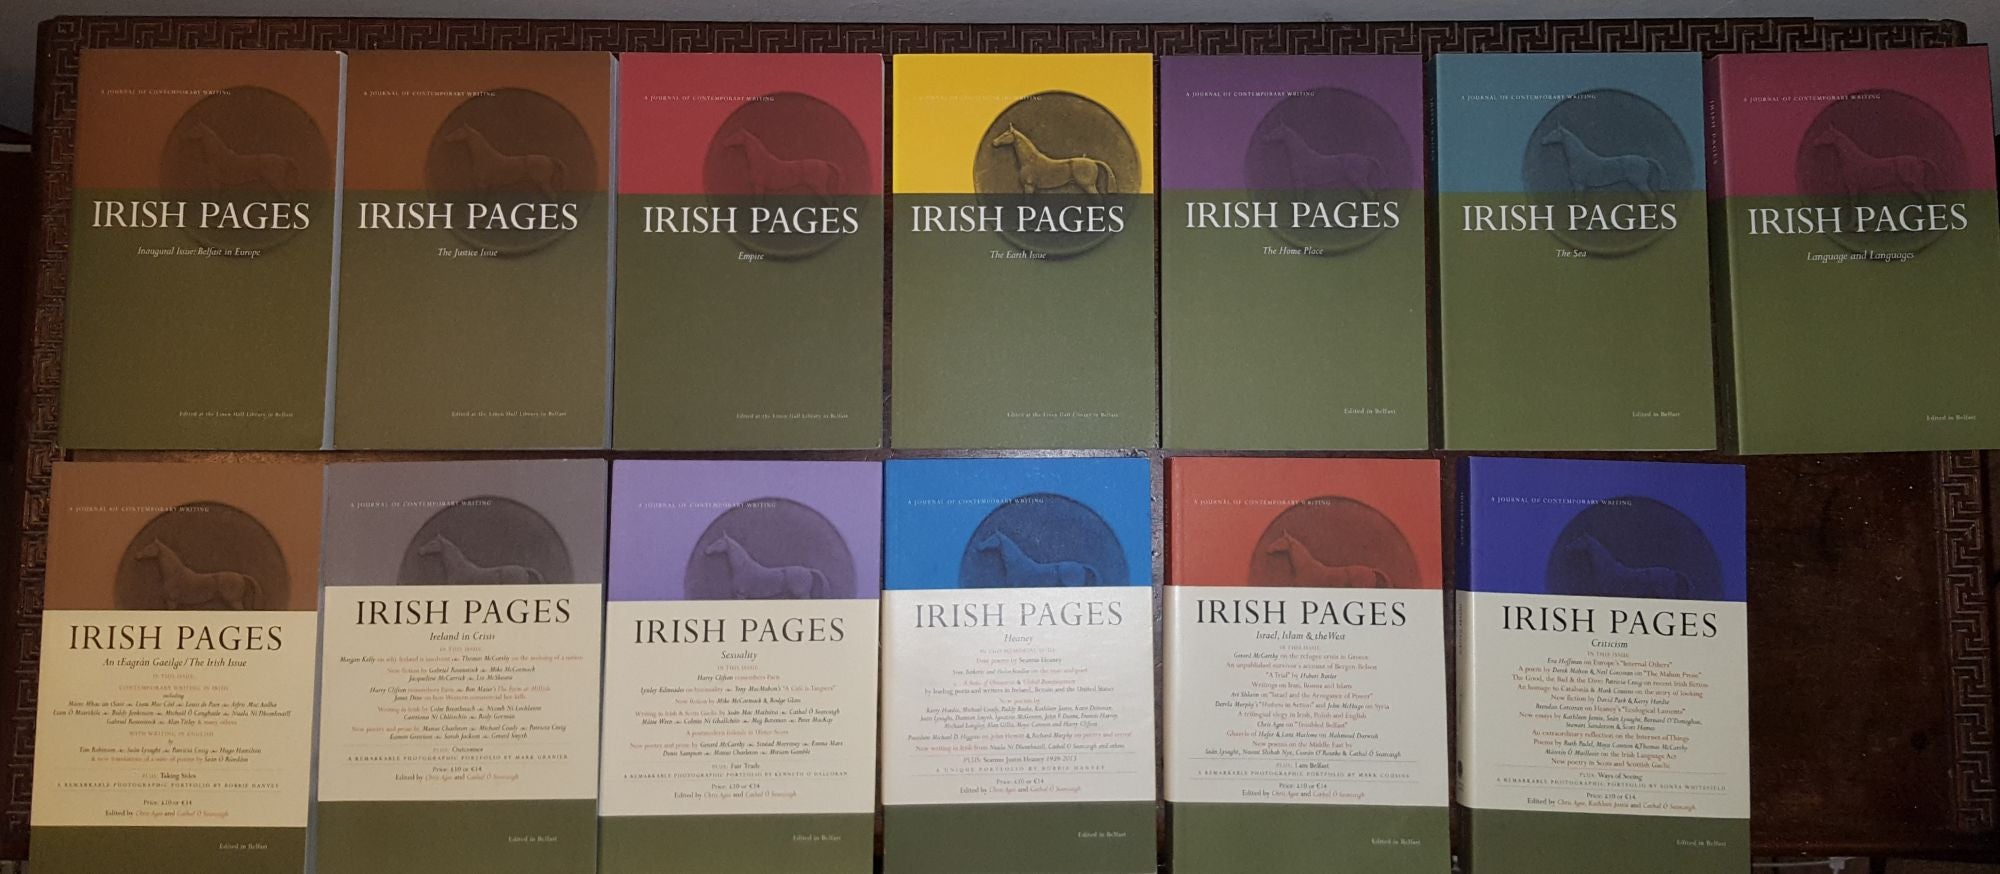 AGEE Chris - Irish Pages a Journal of Contemporary Writing 13 Volumes Volume I Numbers 1 and 2, Volume II Numbers 1 and 2, Volume III Number 2, Volume IV Number 2, Volume V Numbers 1 and 2, Volume VI Numbers 1 and 2, Volume VIII Number 2, Volume IX Number 2, Vol